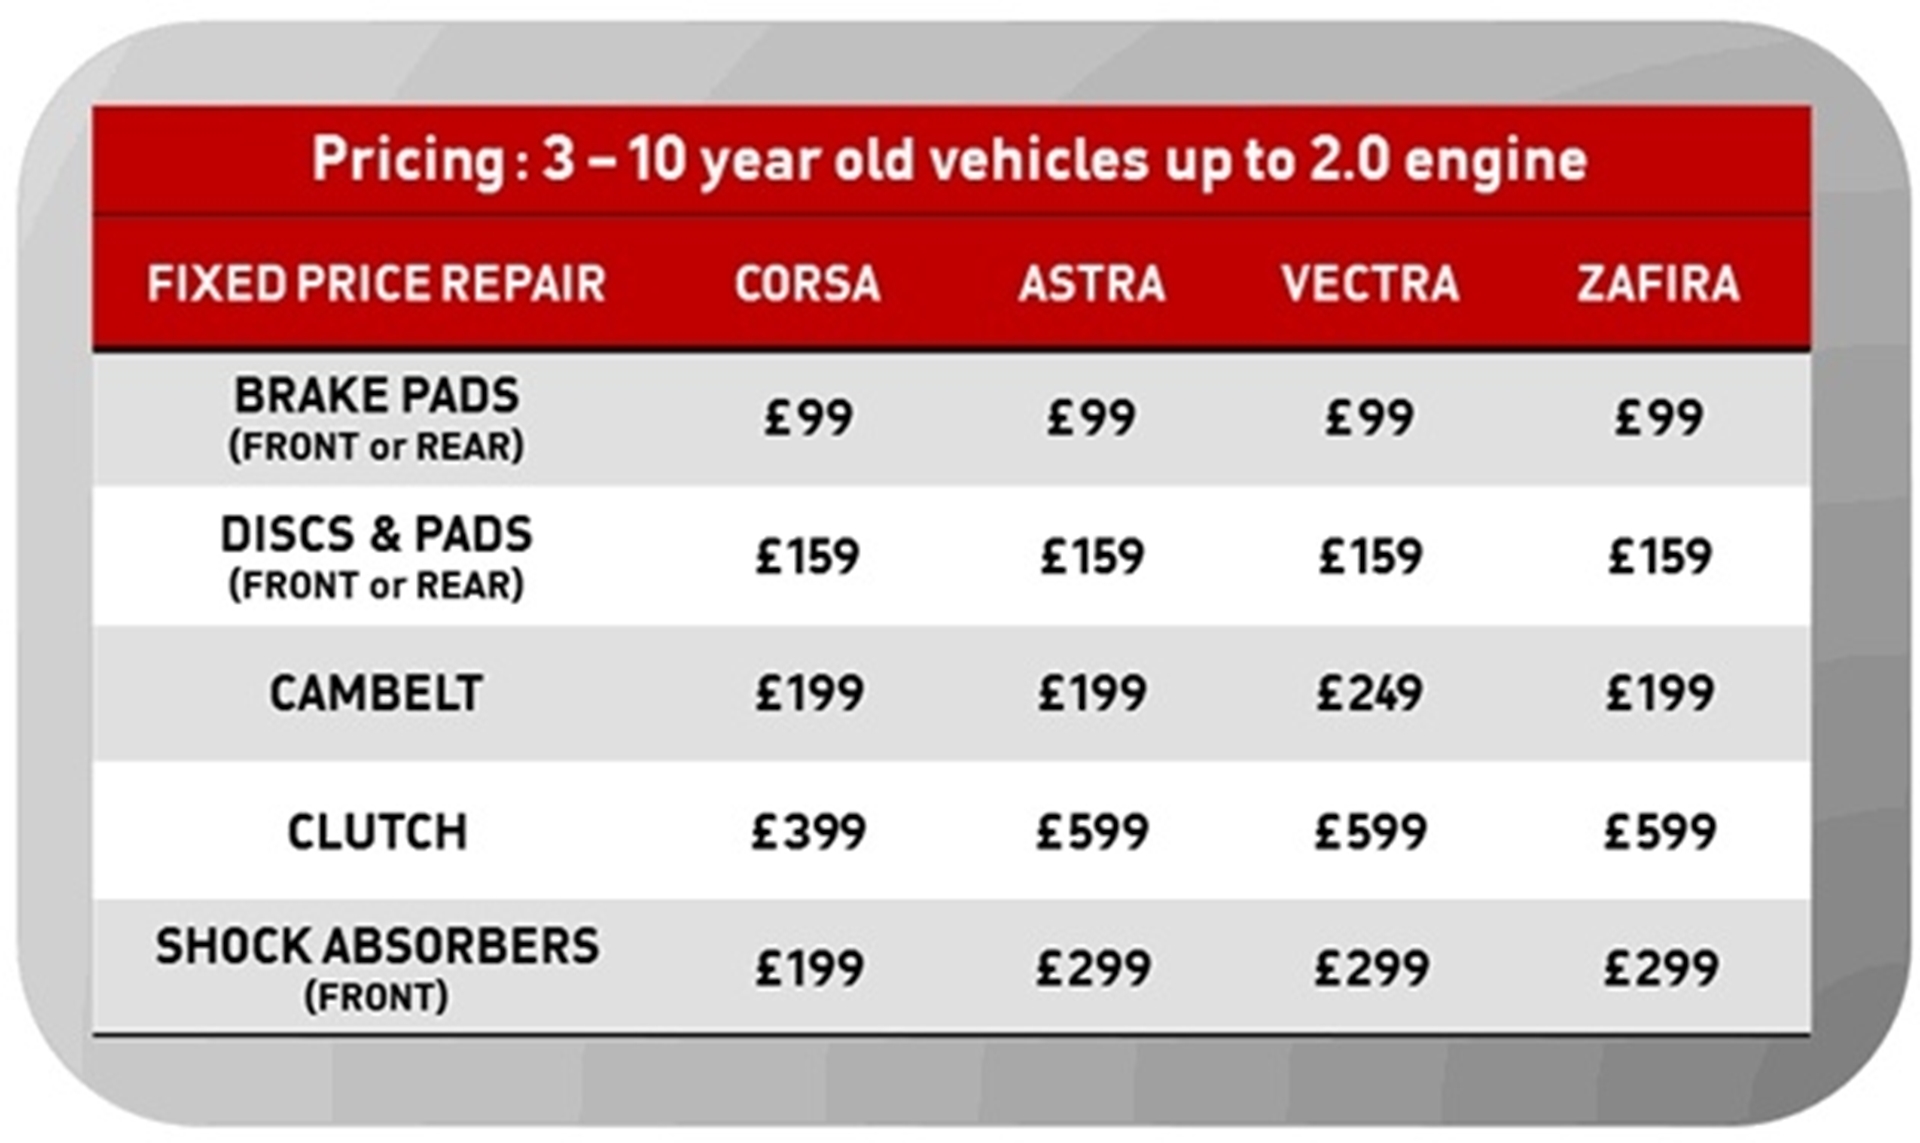 OUSTANDING VALUE AND EXPERTISE WITH VAUXHALL MASTERFIT’S NEW FIXED PRICE REPAIRS